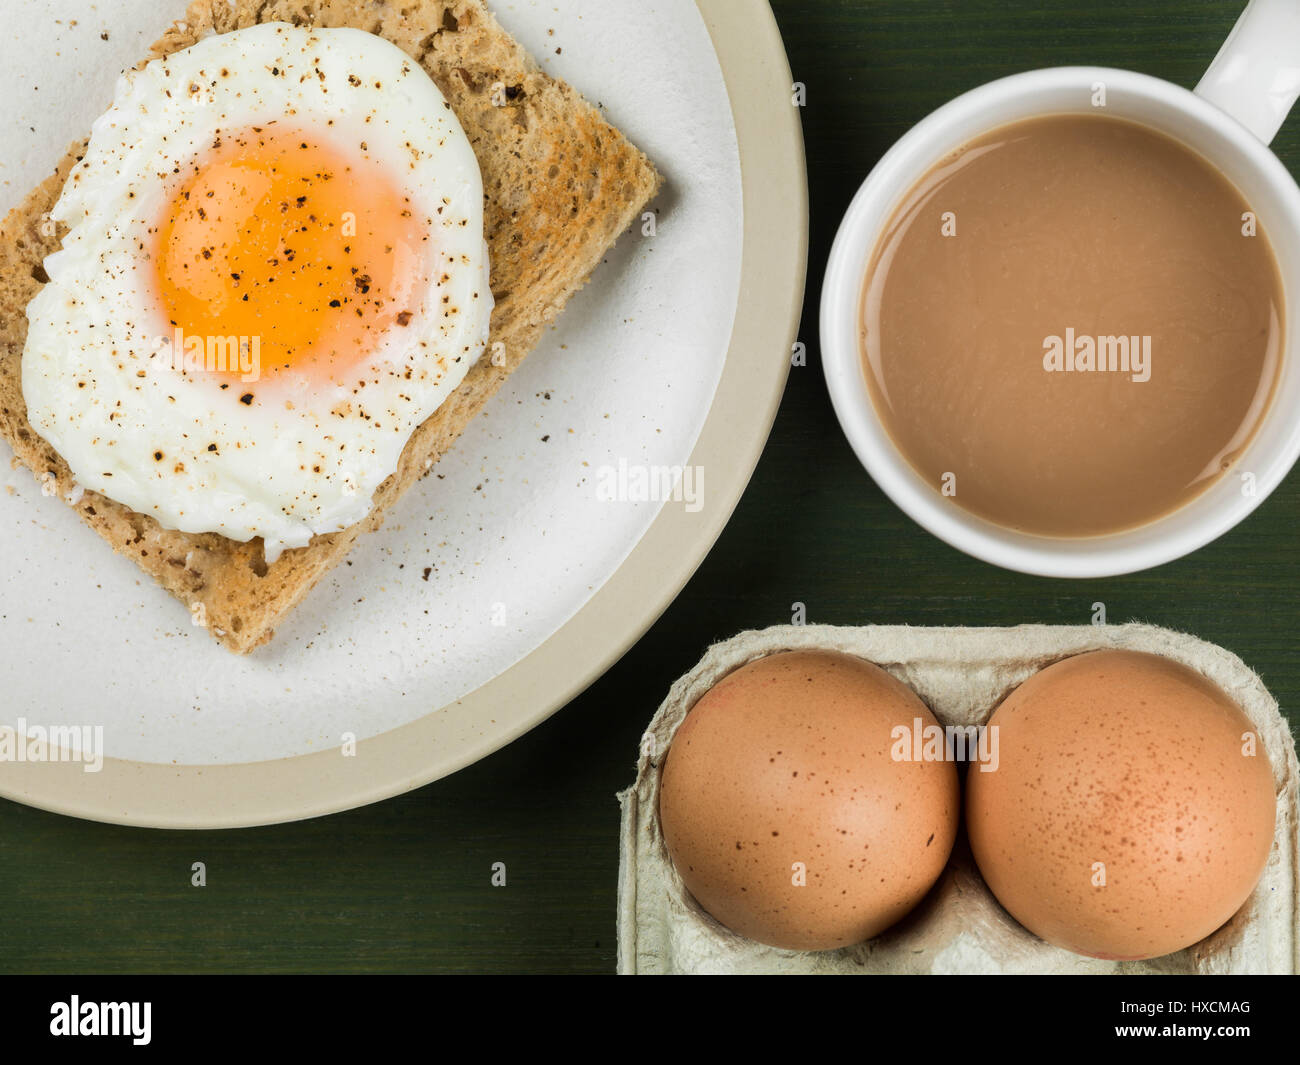 Flat Lay Composition And Tight Crop Of A Poached Egg On Toast, Sunny Side Up, Breakfast With a Mug of Tea or Coffee and Two Raw Eggs In Their Shells Stock Photo